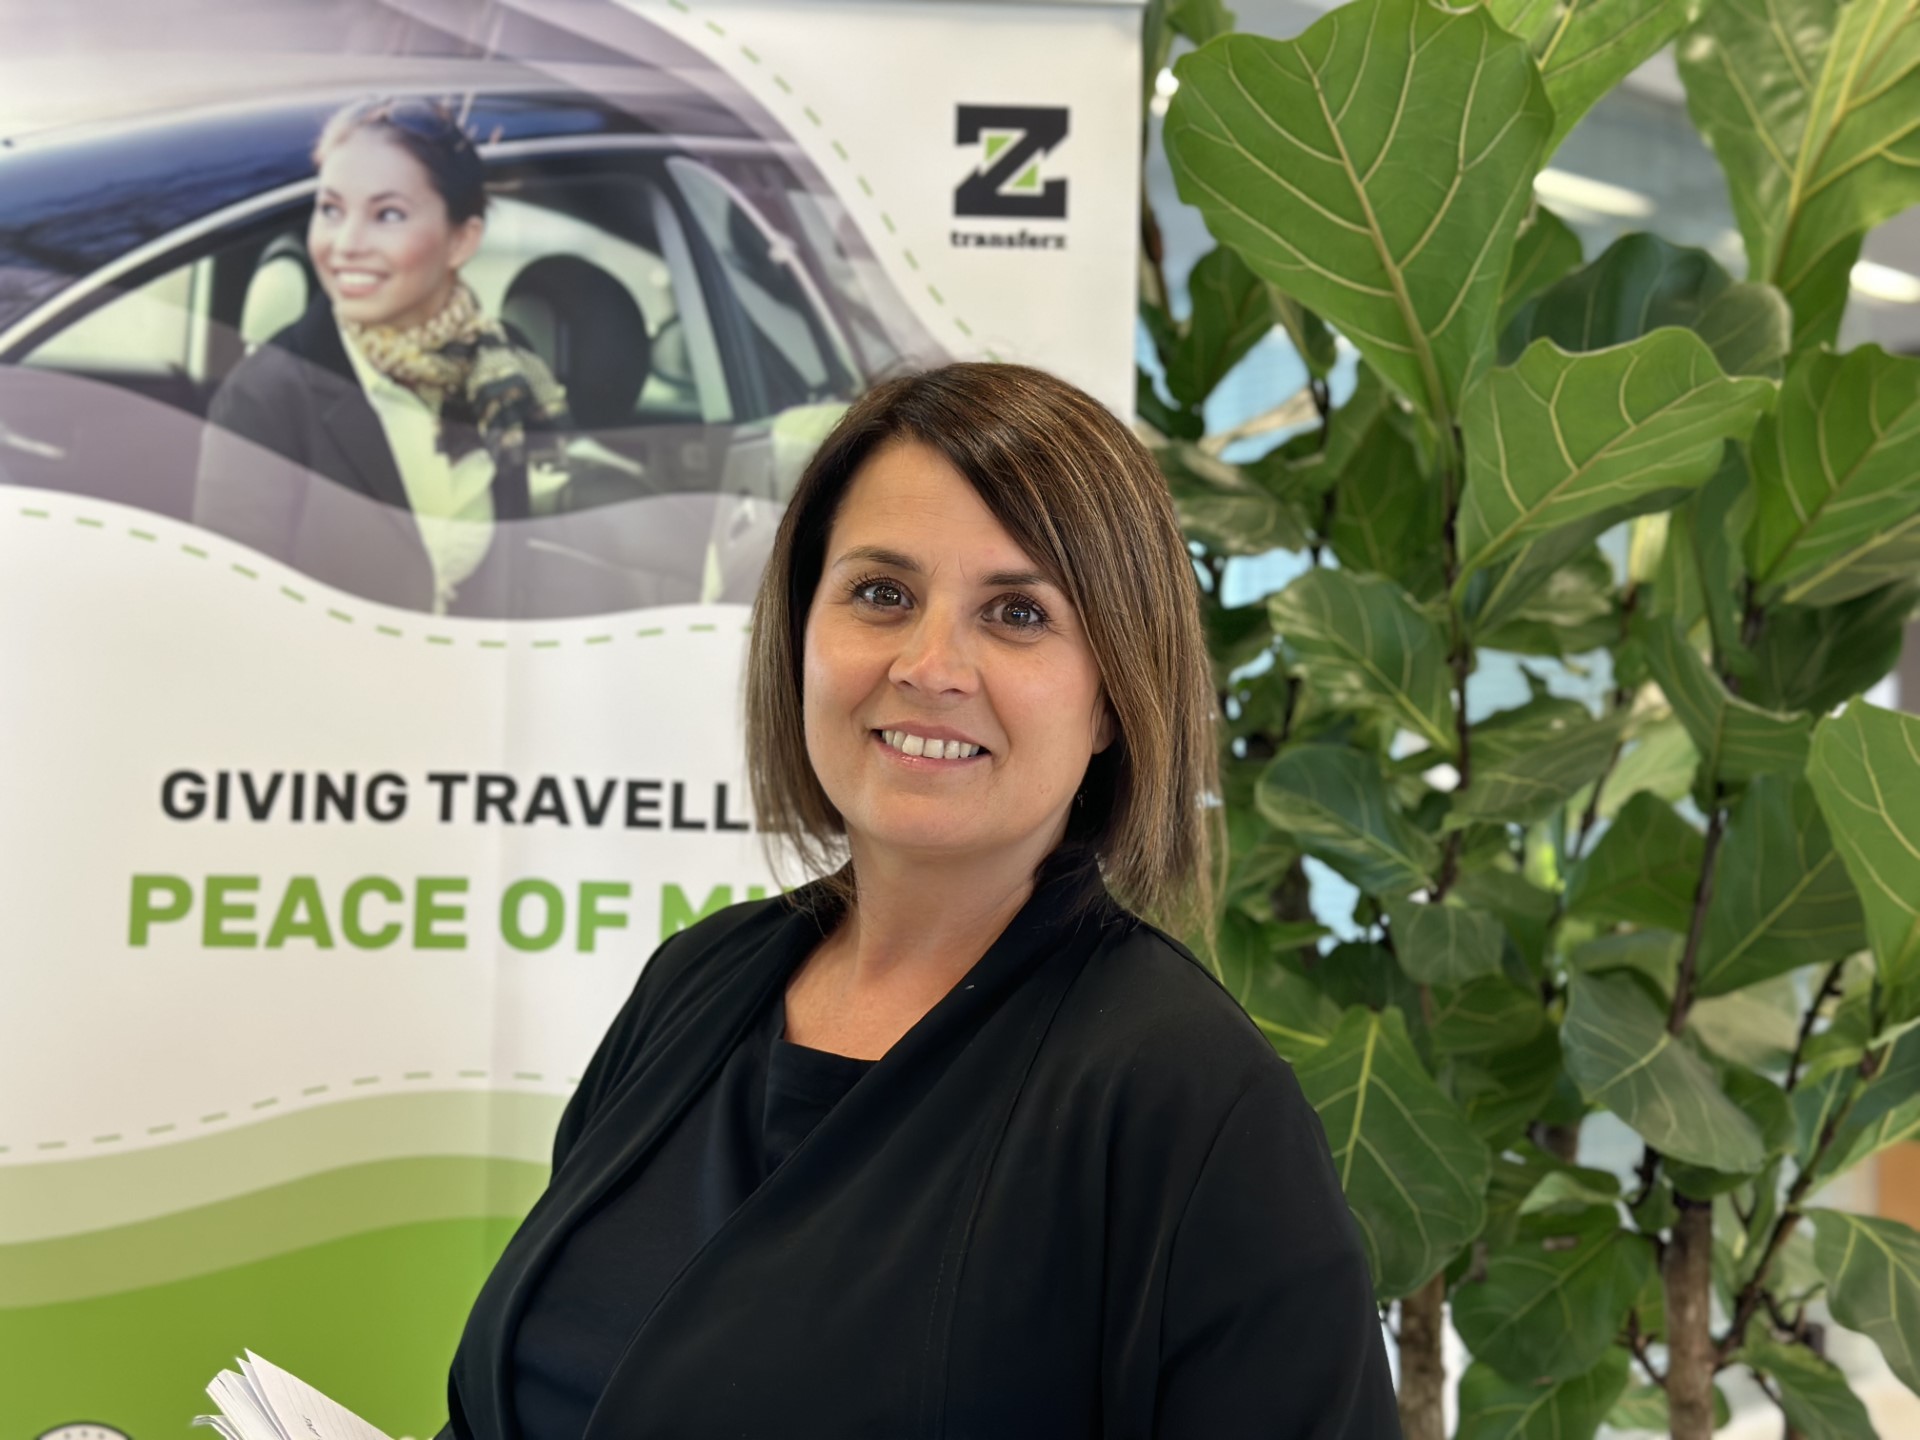 Becky Brindle transfers to Transferz to drive growth in the UK